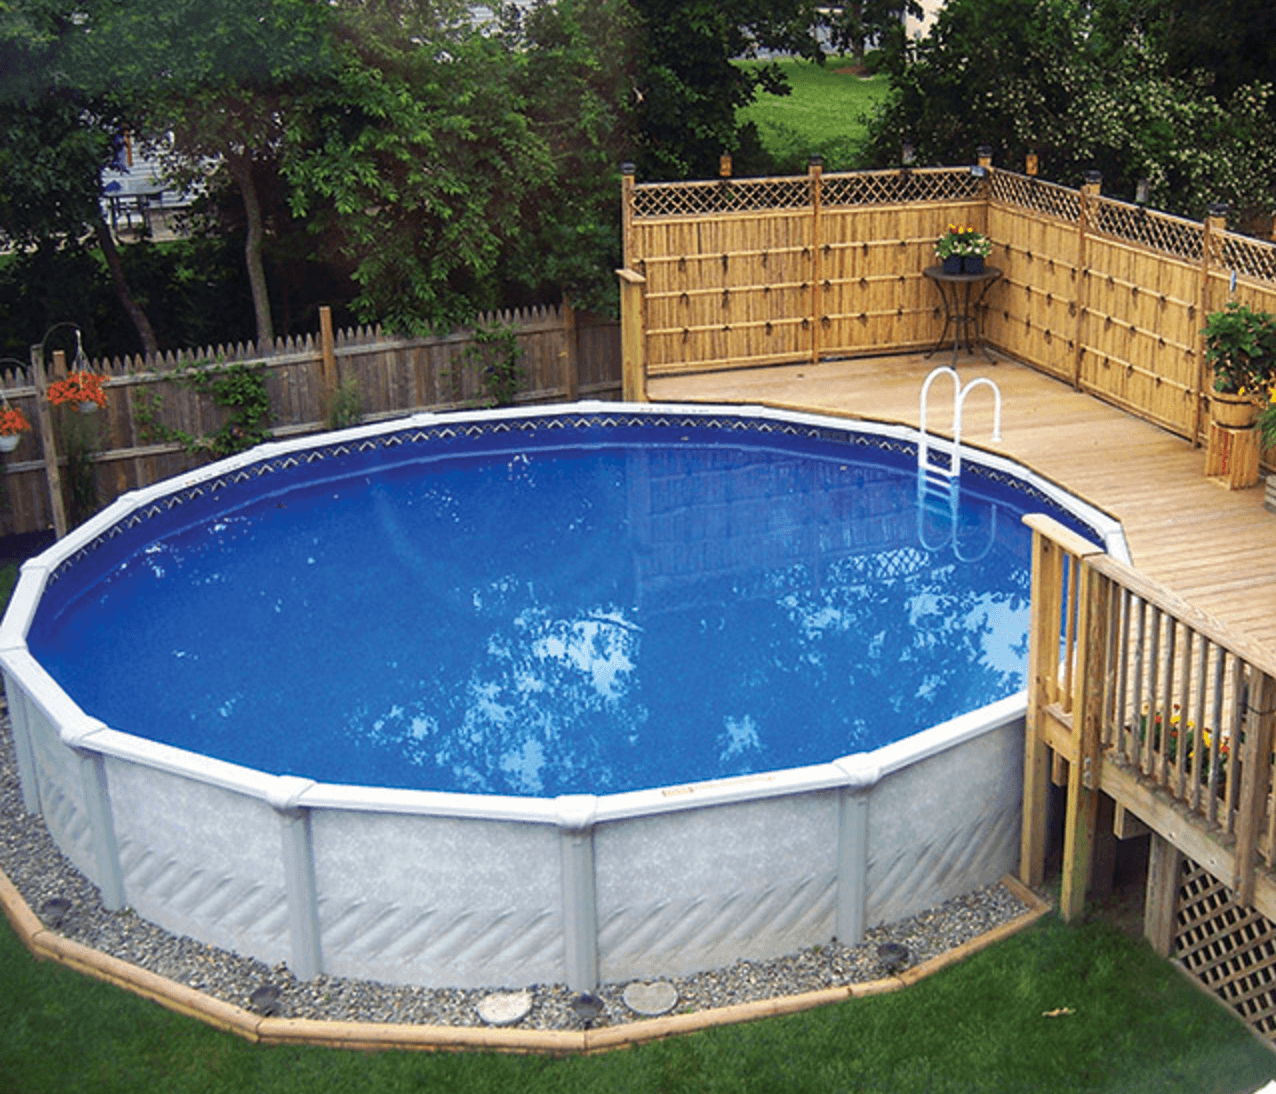 Top 10 Best Above Ground Pool Reviews 2019